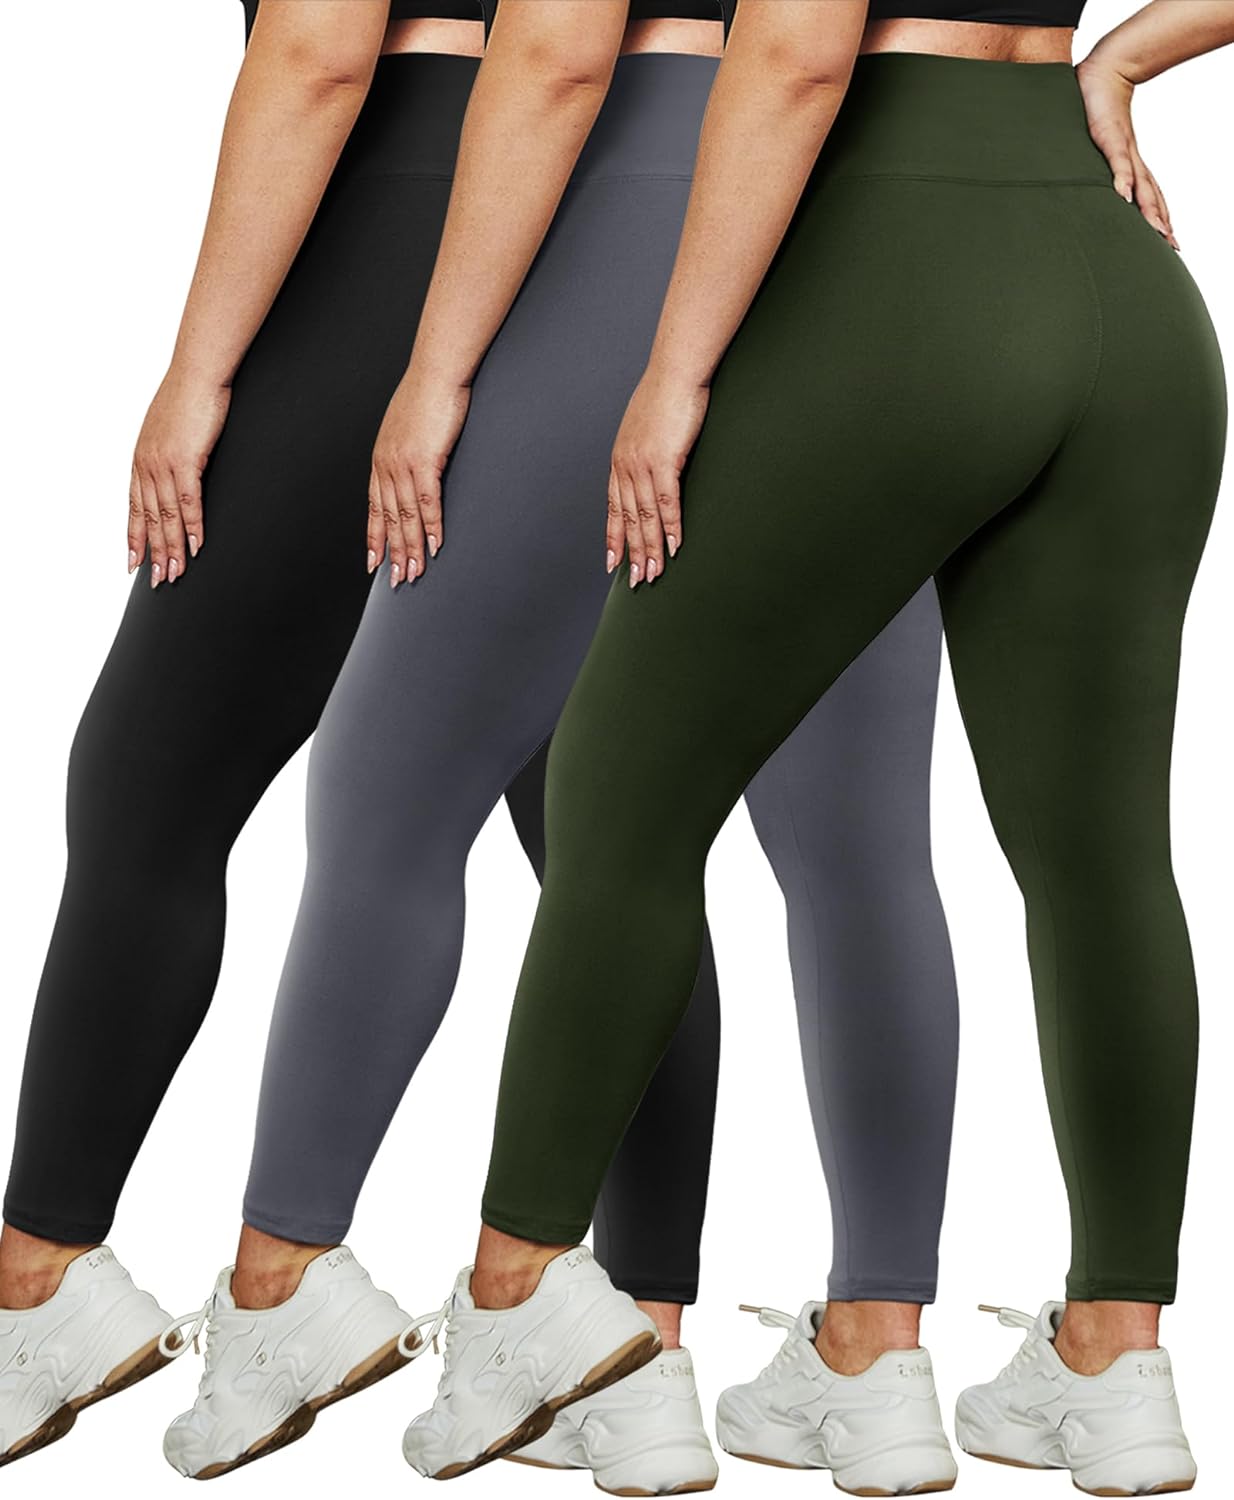 3 Pack Plus Size Leggings for Women - High Waist Stretchy Soft Yoga Pants for Workout Running